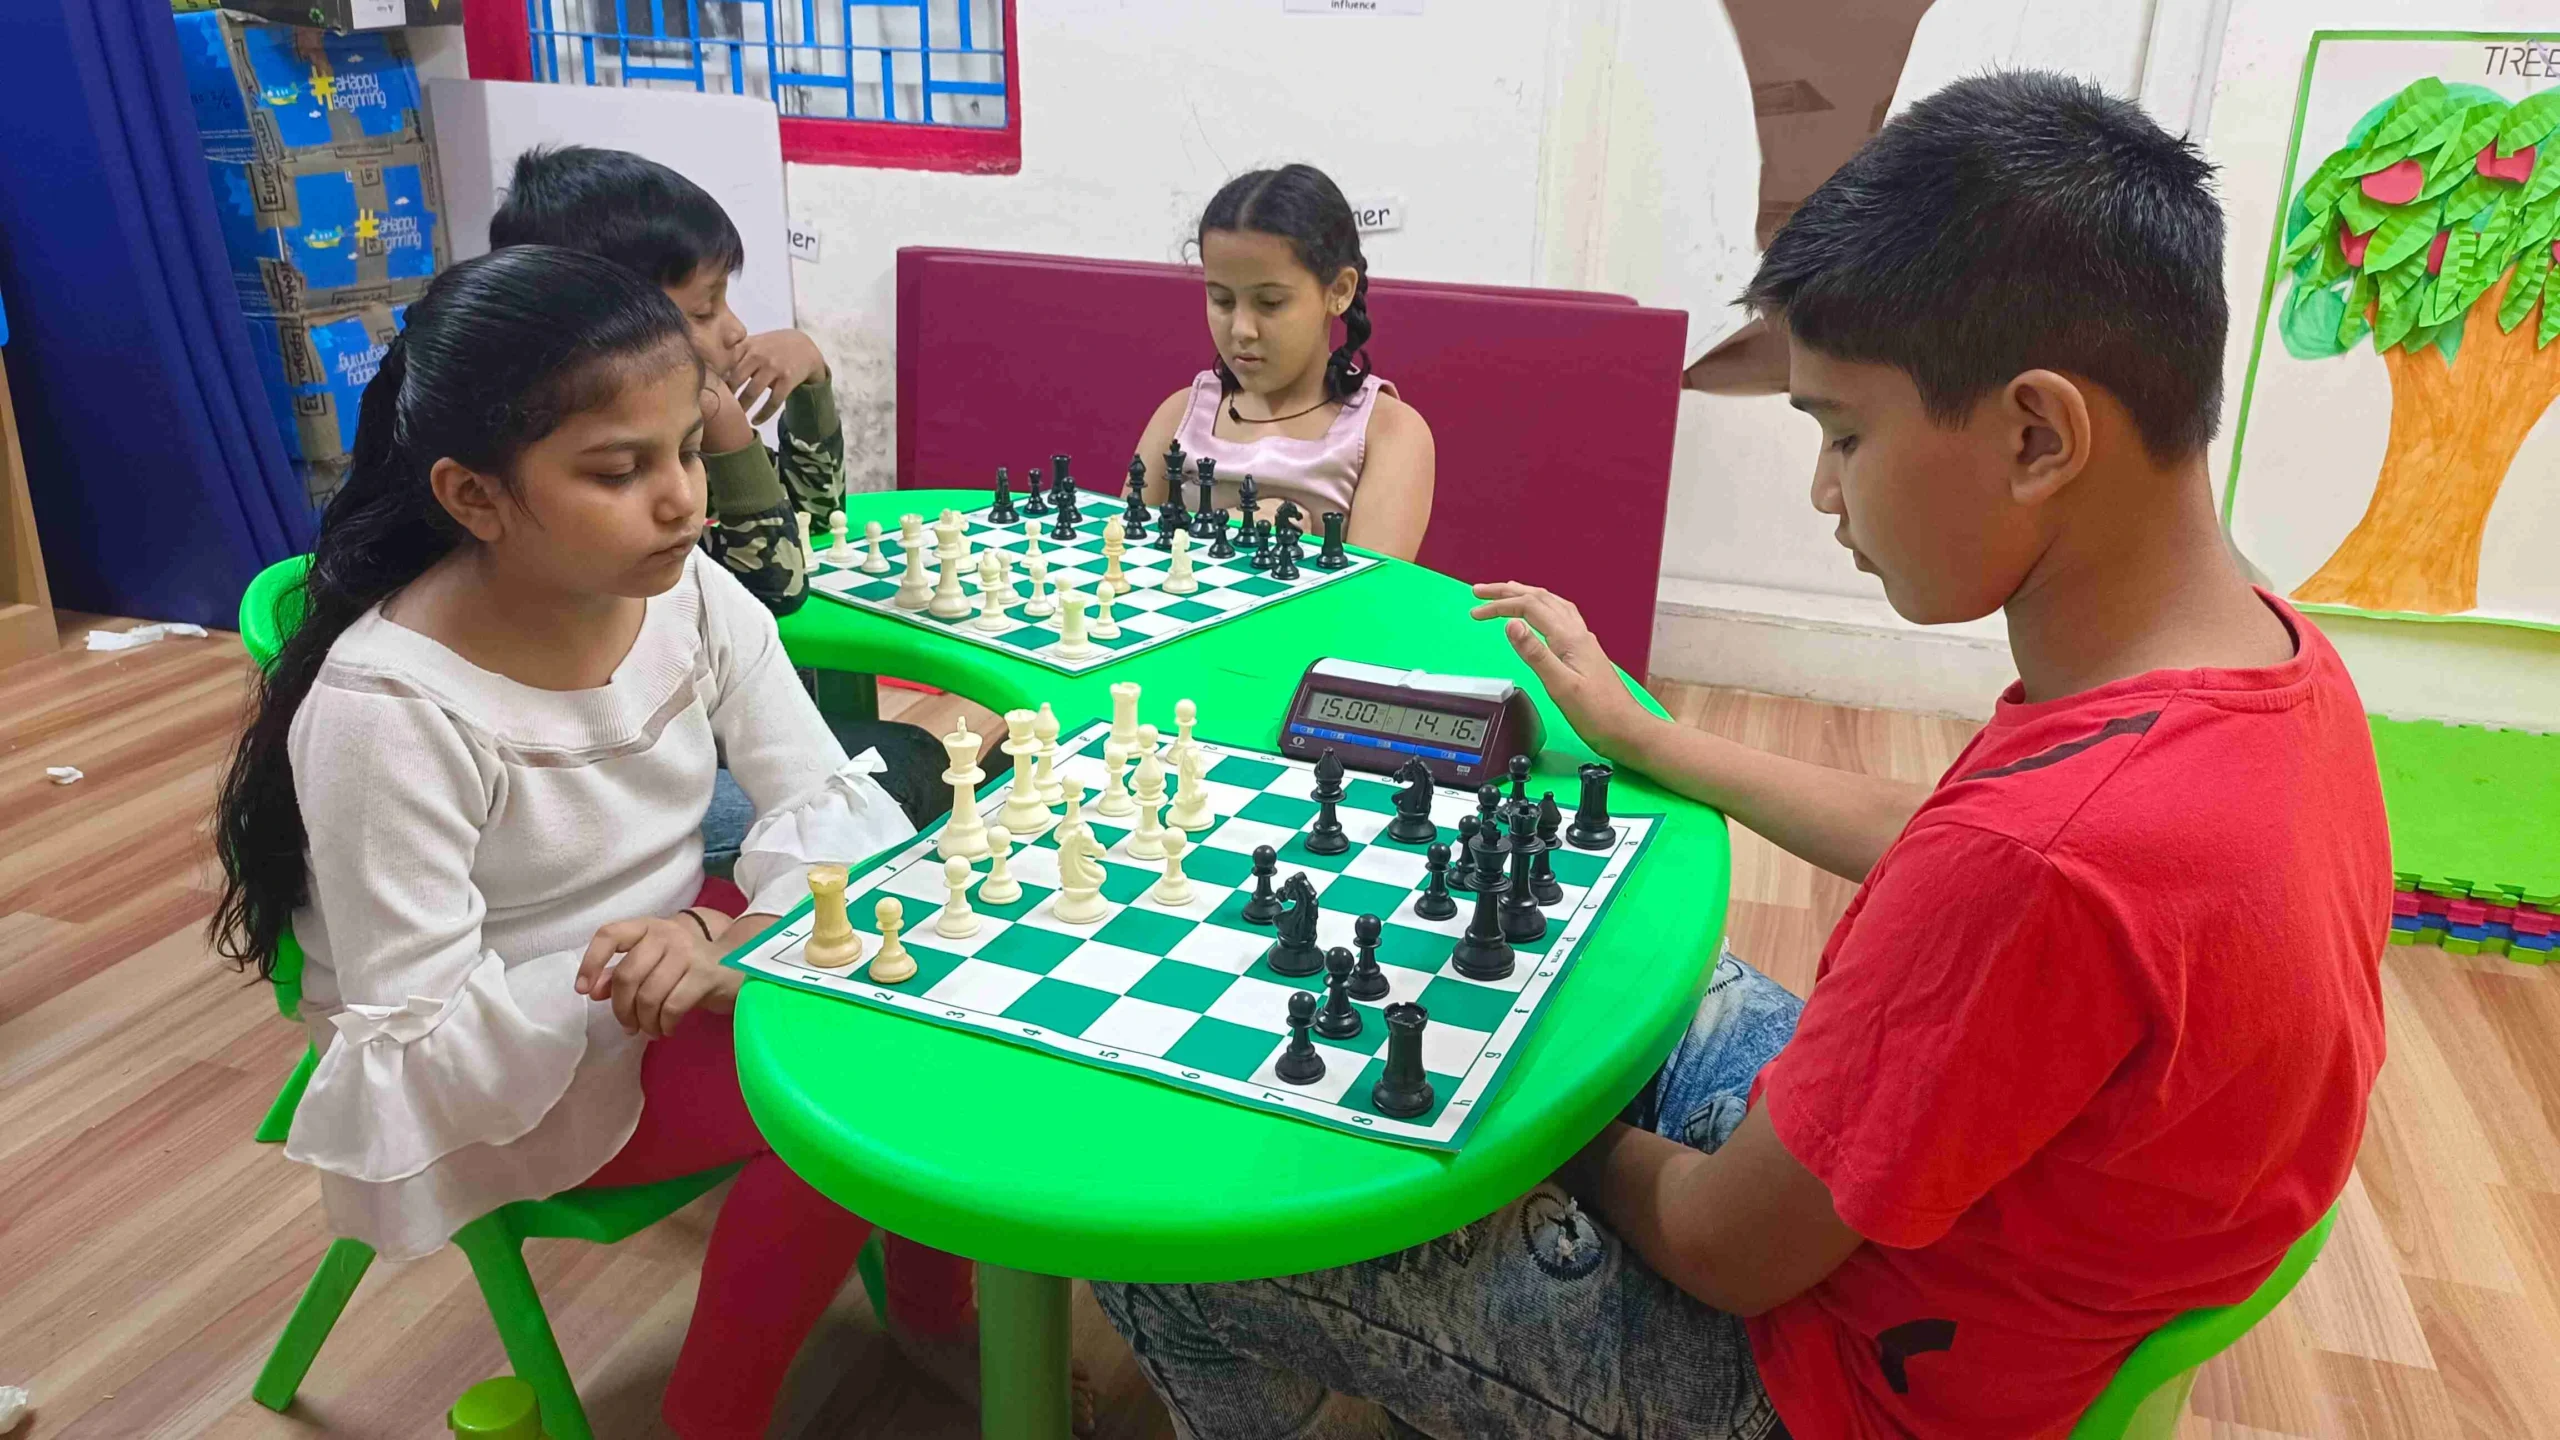 Chess match being played at Offline chess classes.